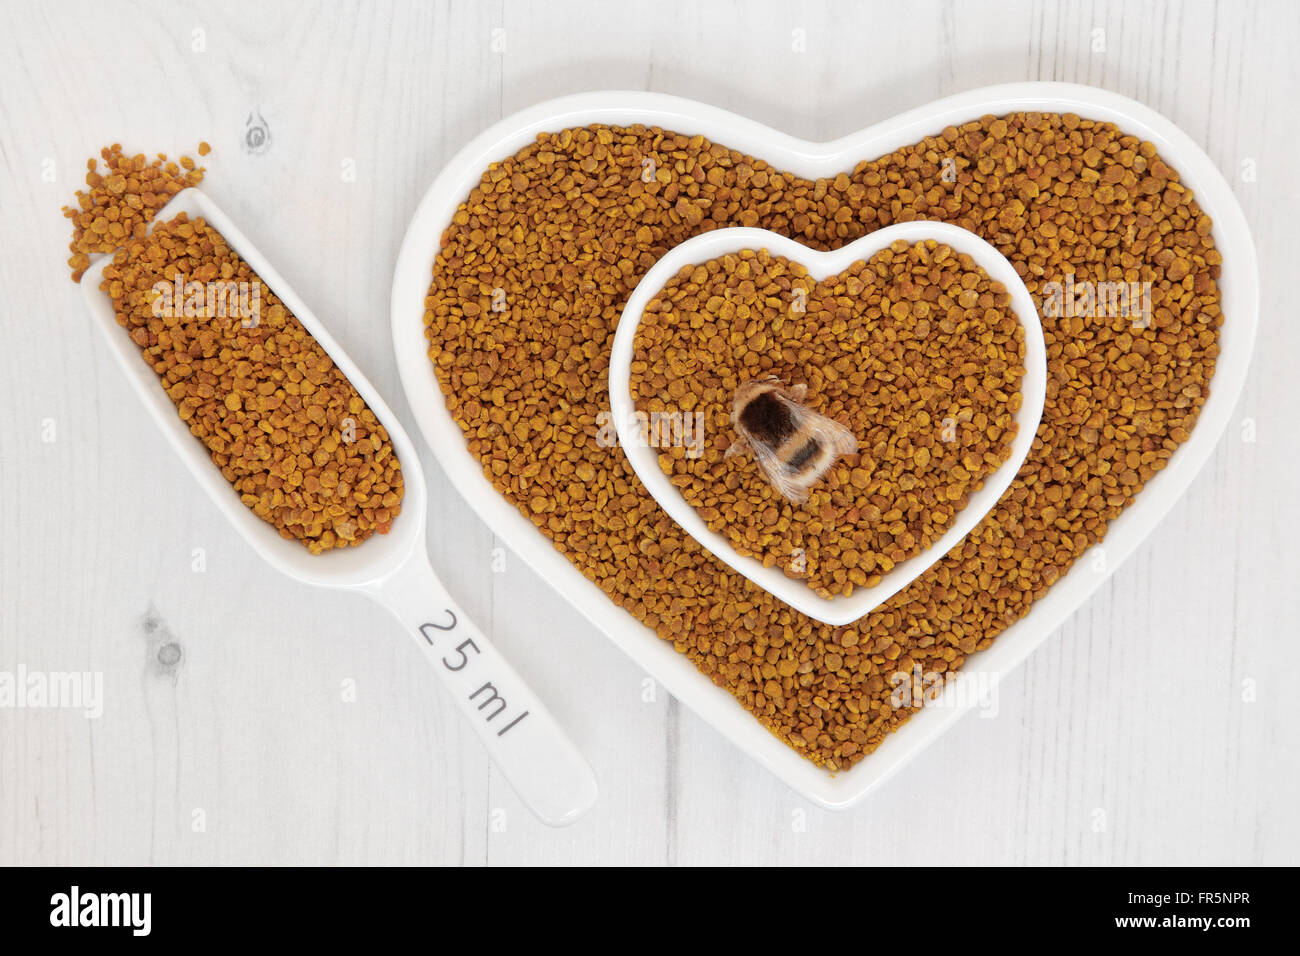 Honey bee pollen grain super food supplement in scoop and heart shaped dishes over distressed wooden background. Stock Photo